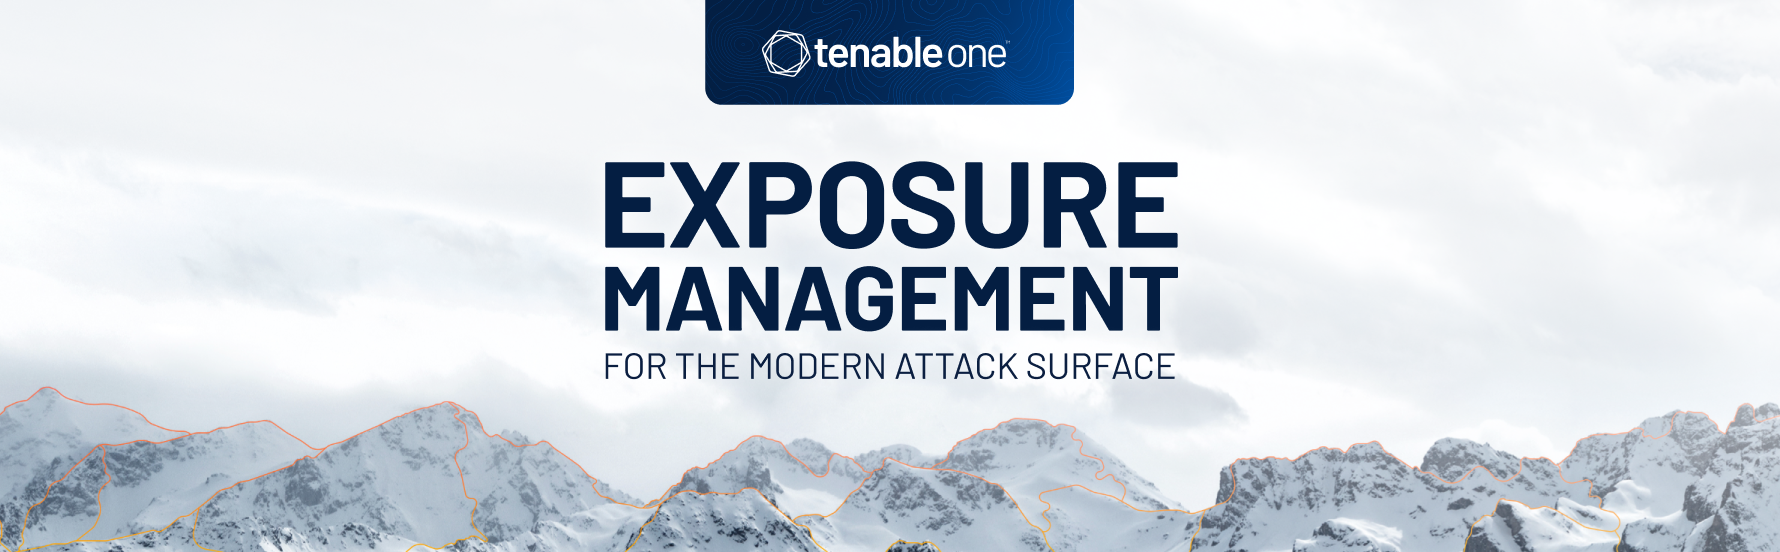 how to use exposure management to reduce cyber risk